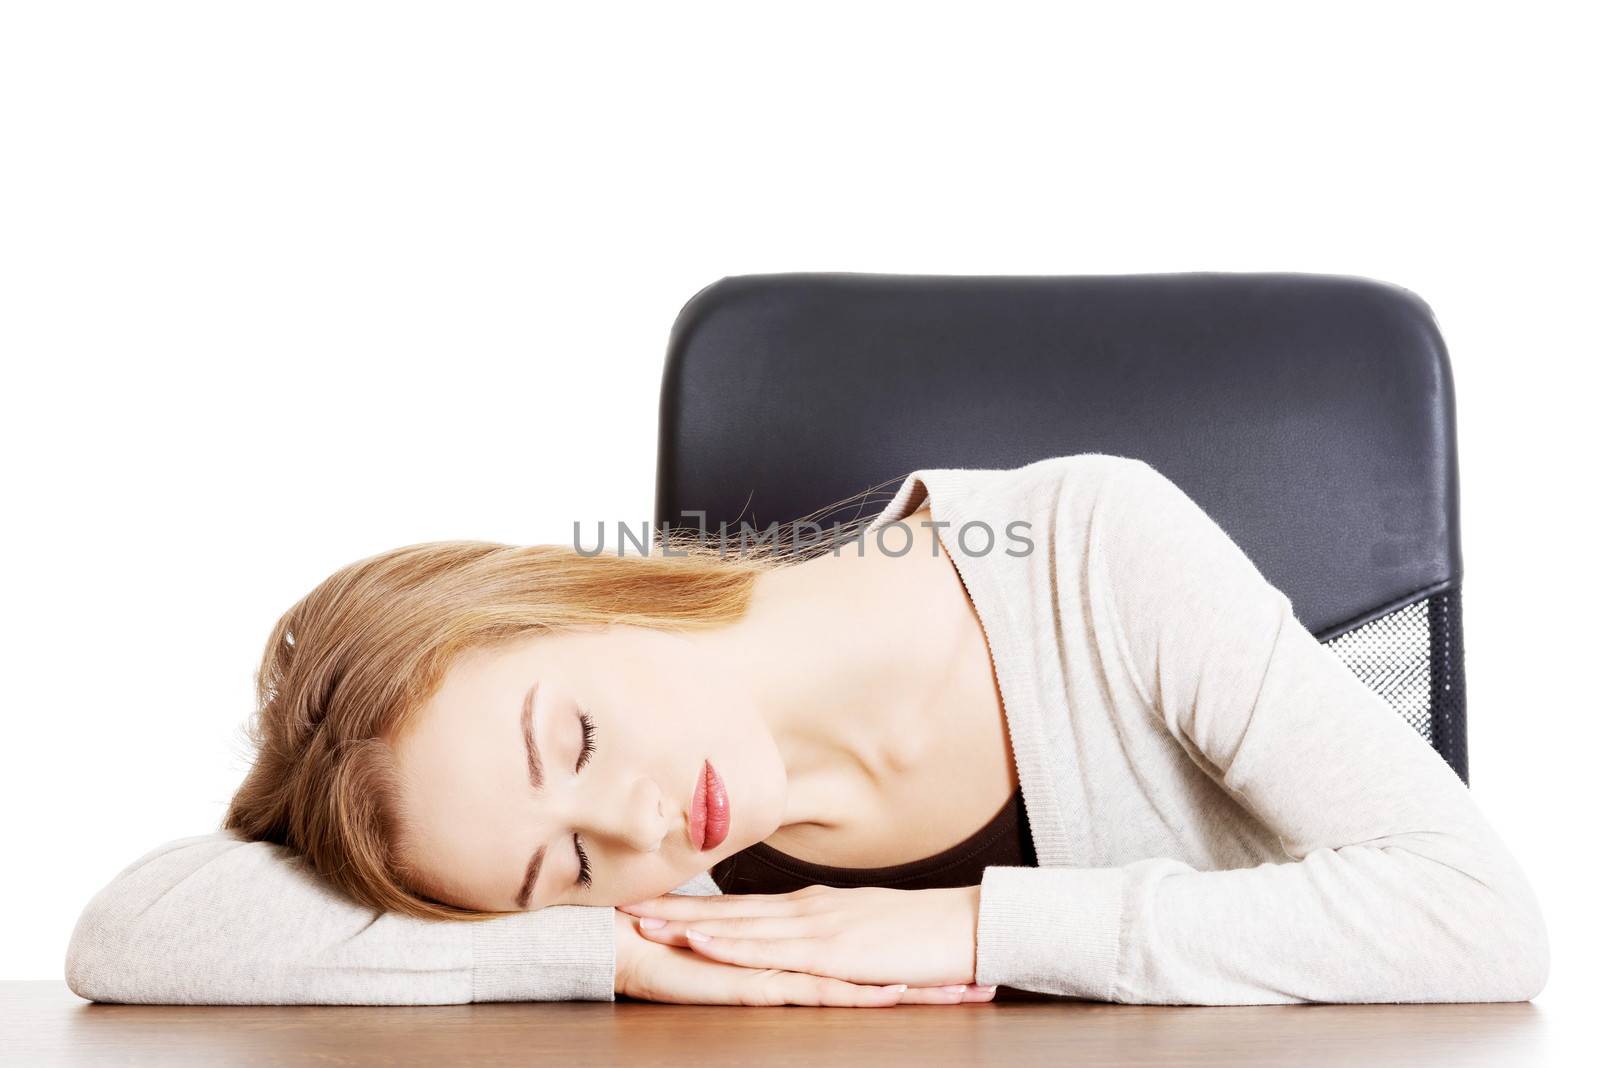 Young casual woman student is sleeping on a desk. Isolated on white.